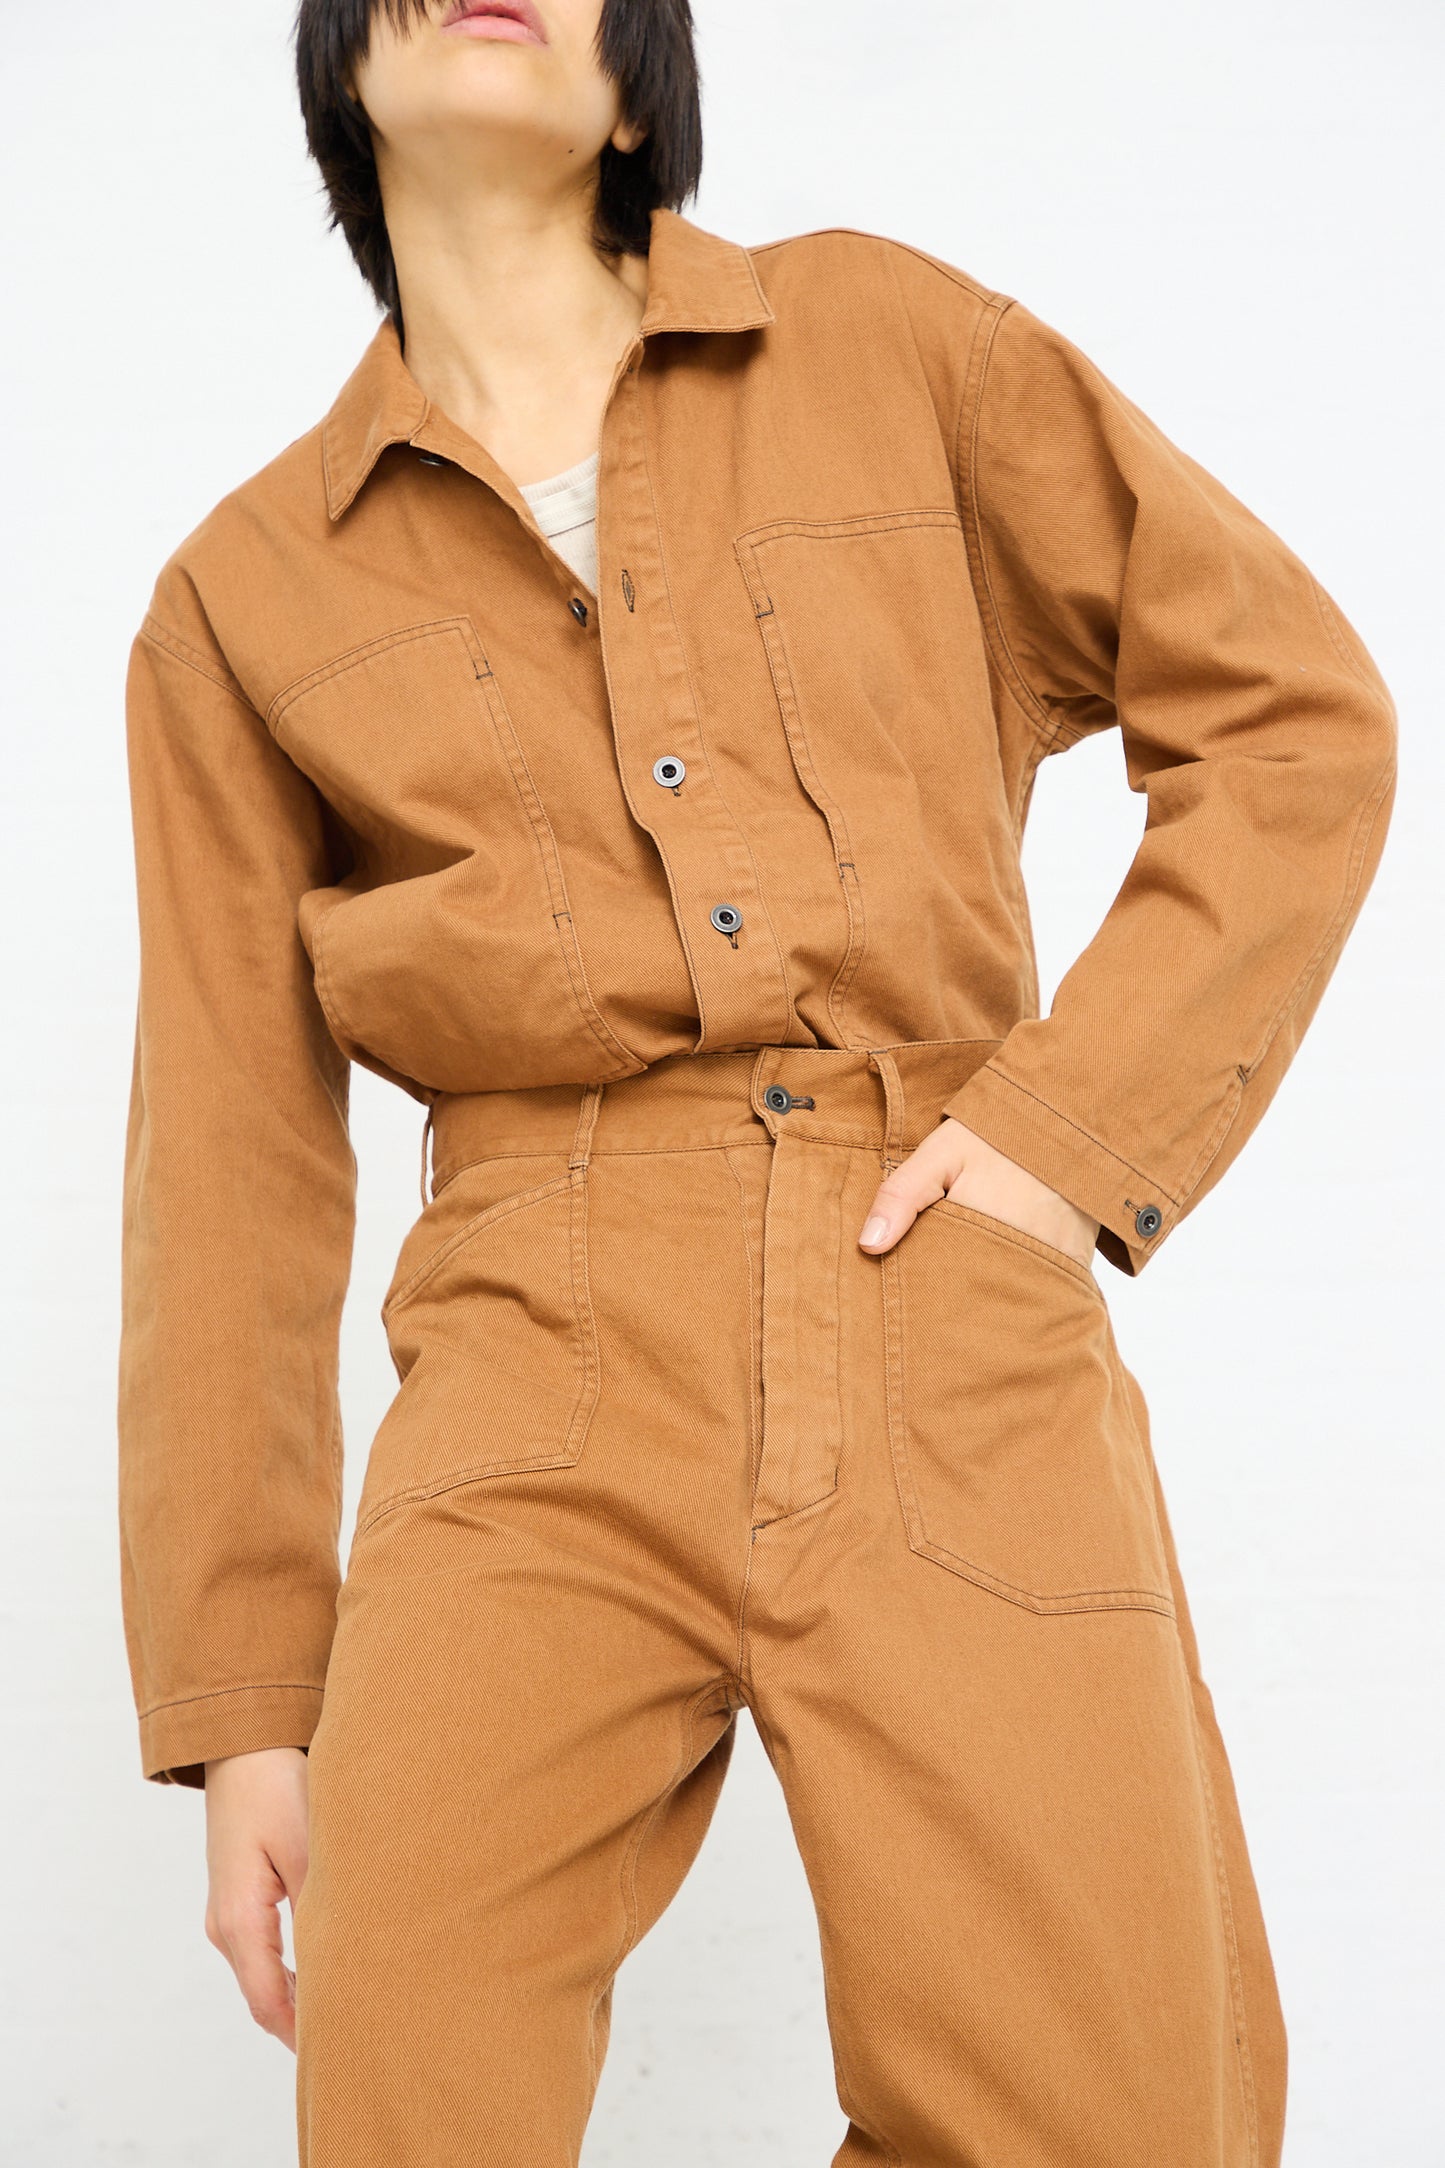 Woman in a Chimala Classic Drill US Army Work Trouser in Camel jumpsuit with hands on her hips against a white background.